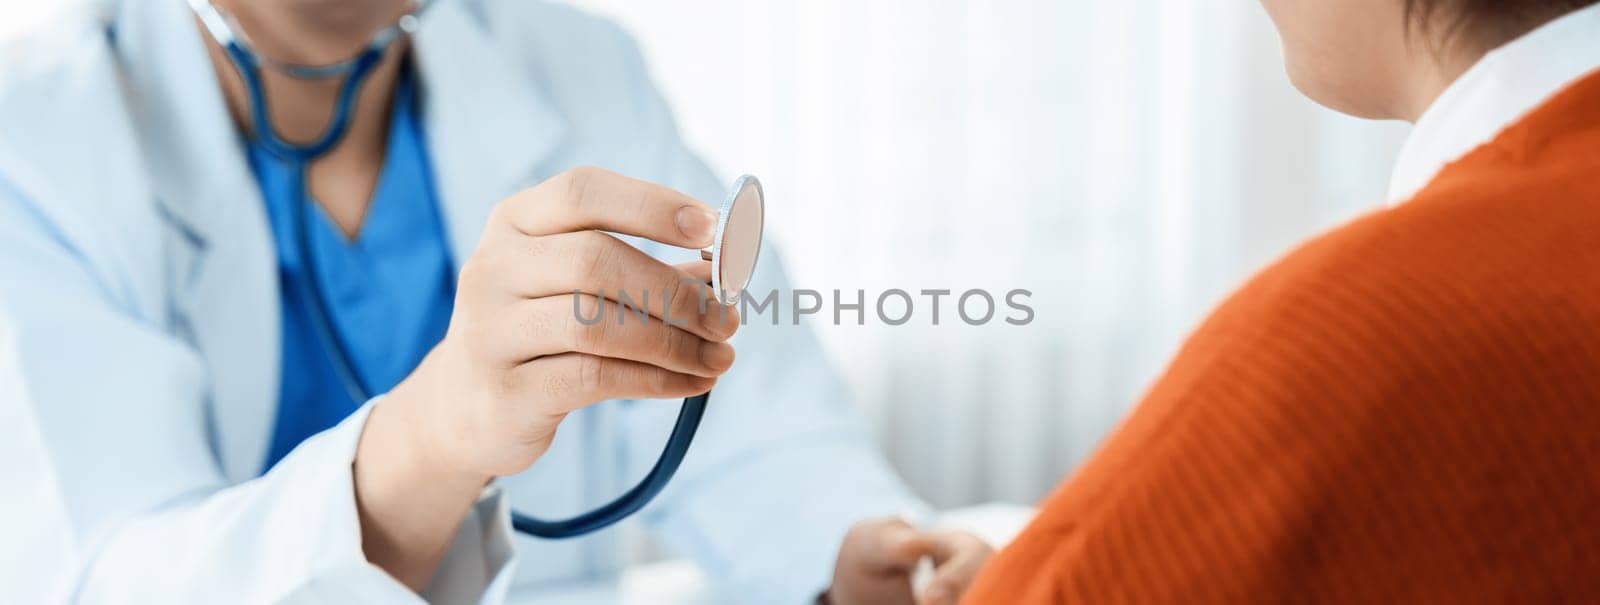 Patient attend doctor's appointment at clinic or hospital office. Doctor examining and diagnosis symptoms while checking the patient's pulse with stethoscope. Panorama Rigid